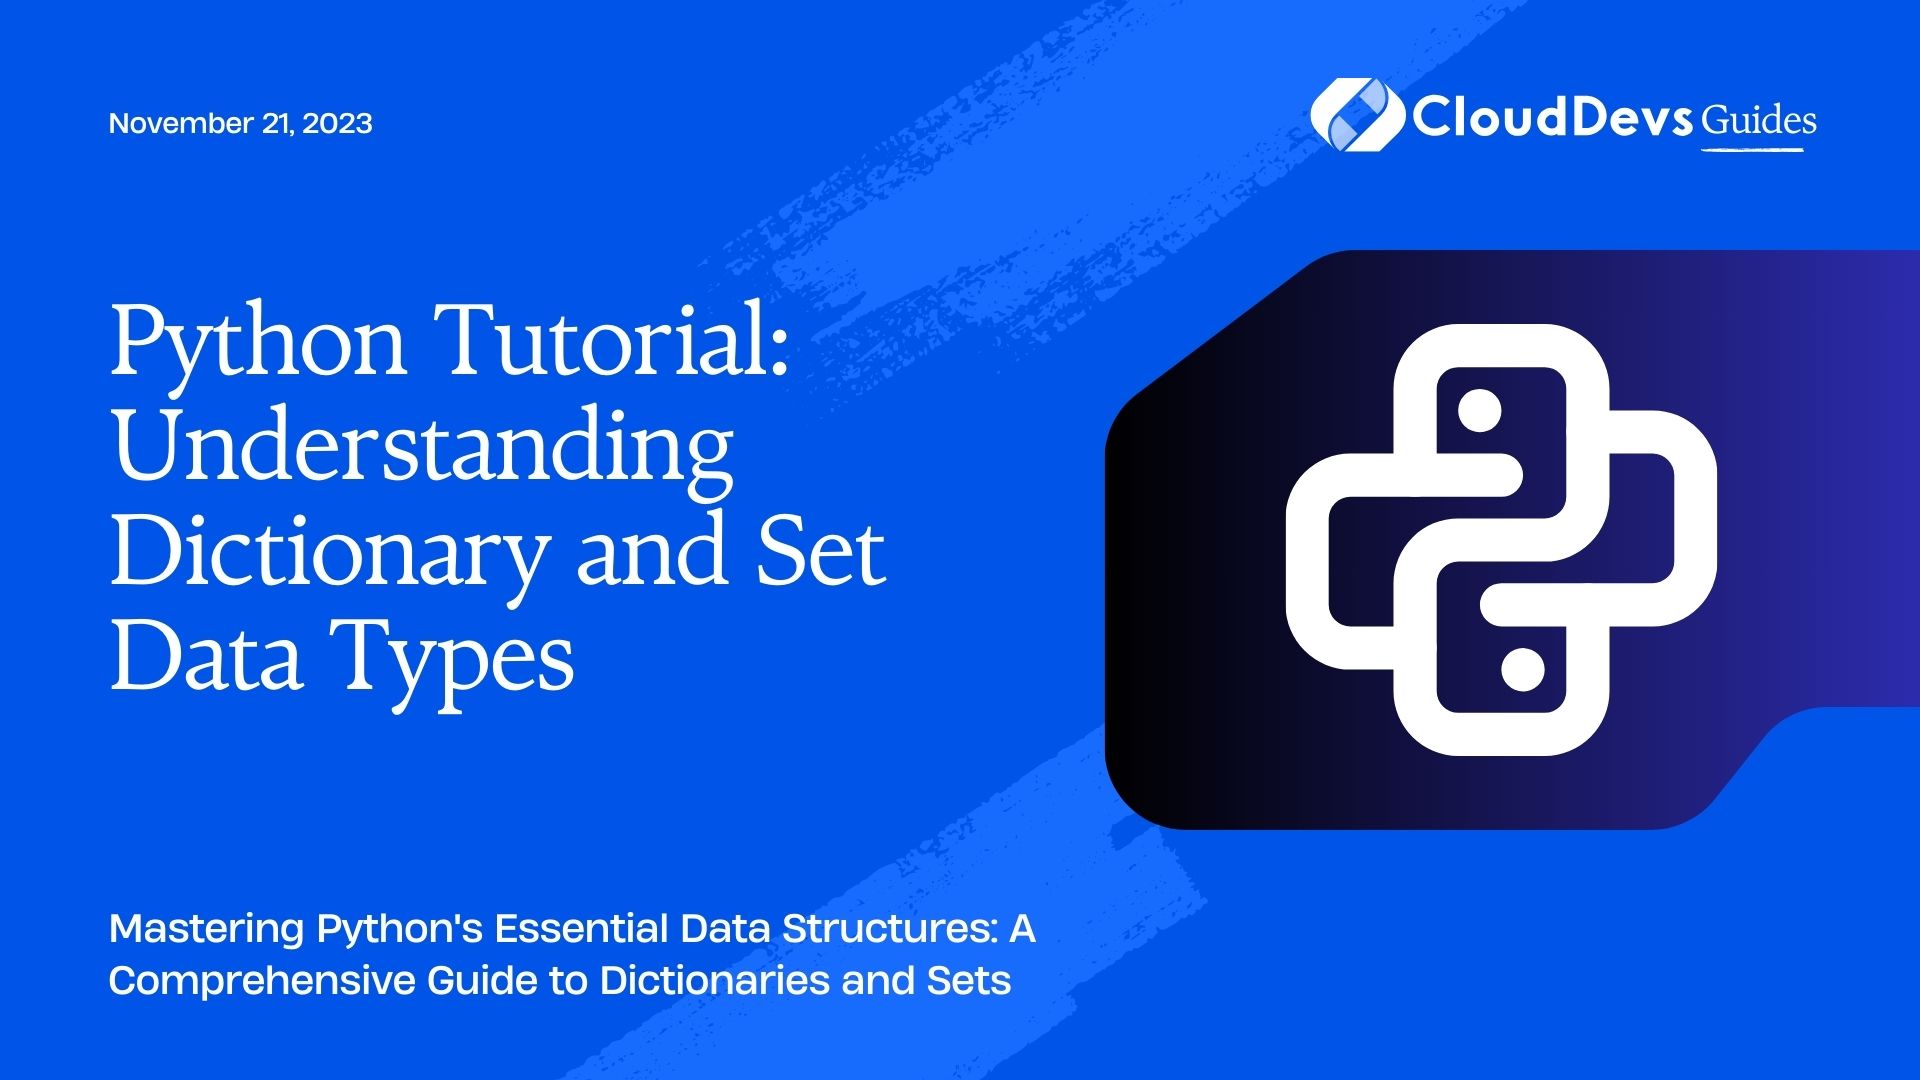 Python Tutorial: Understanding Dictionary and Set Data Types